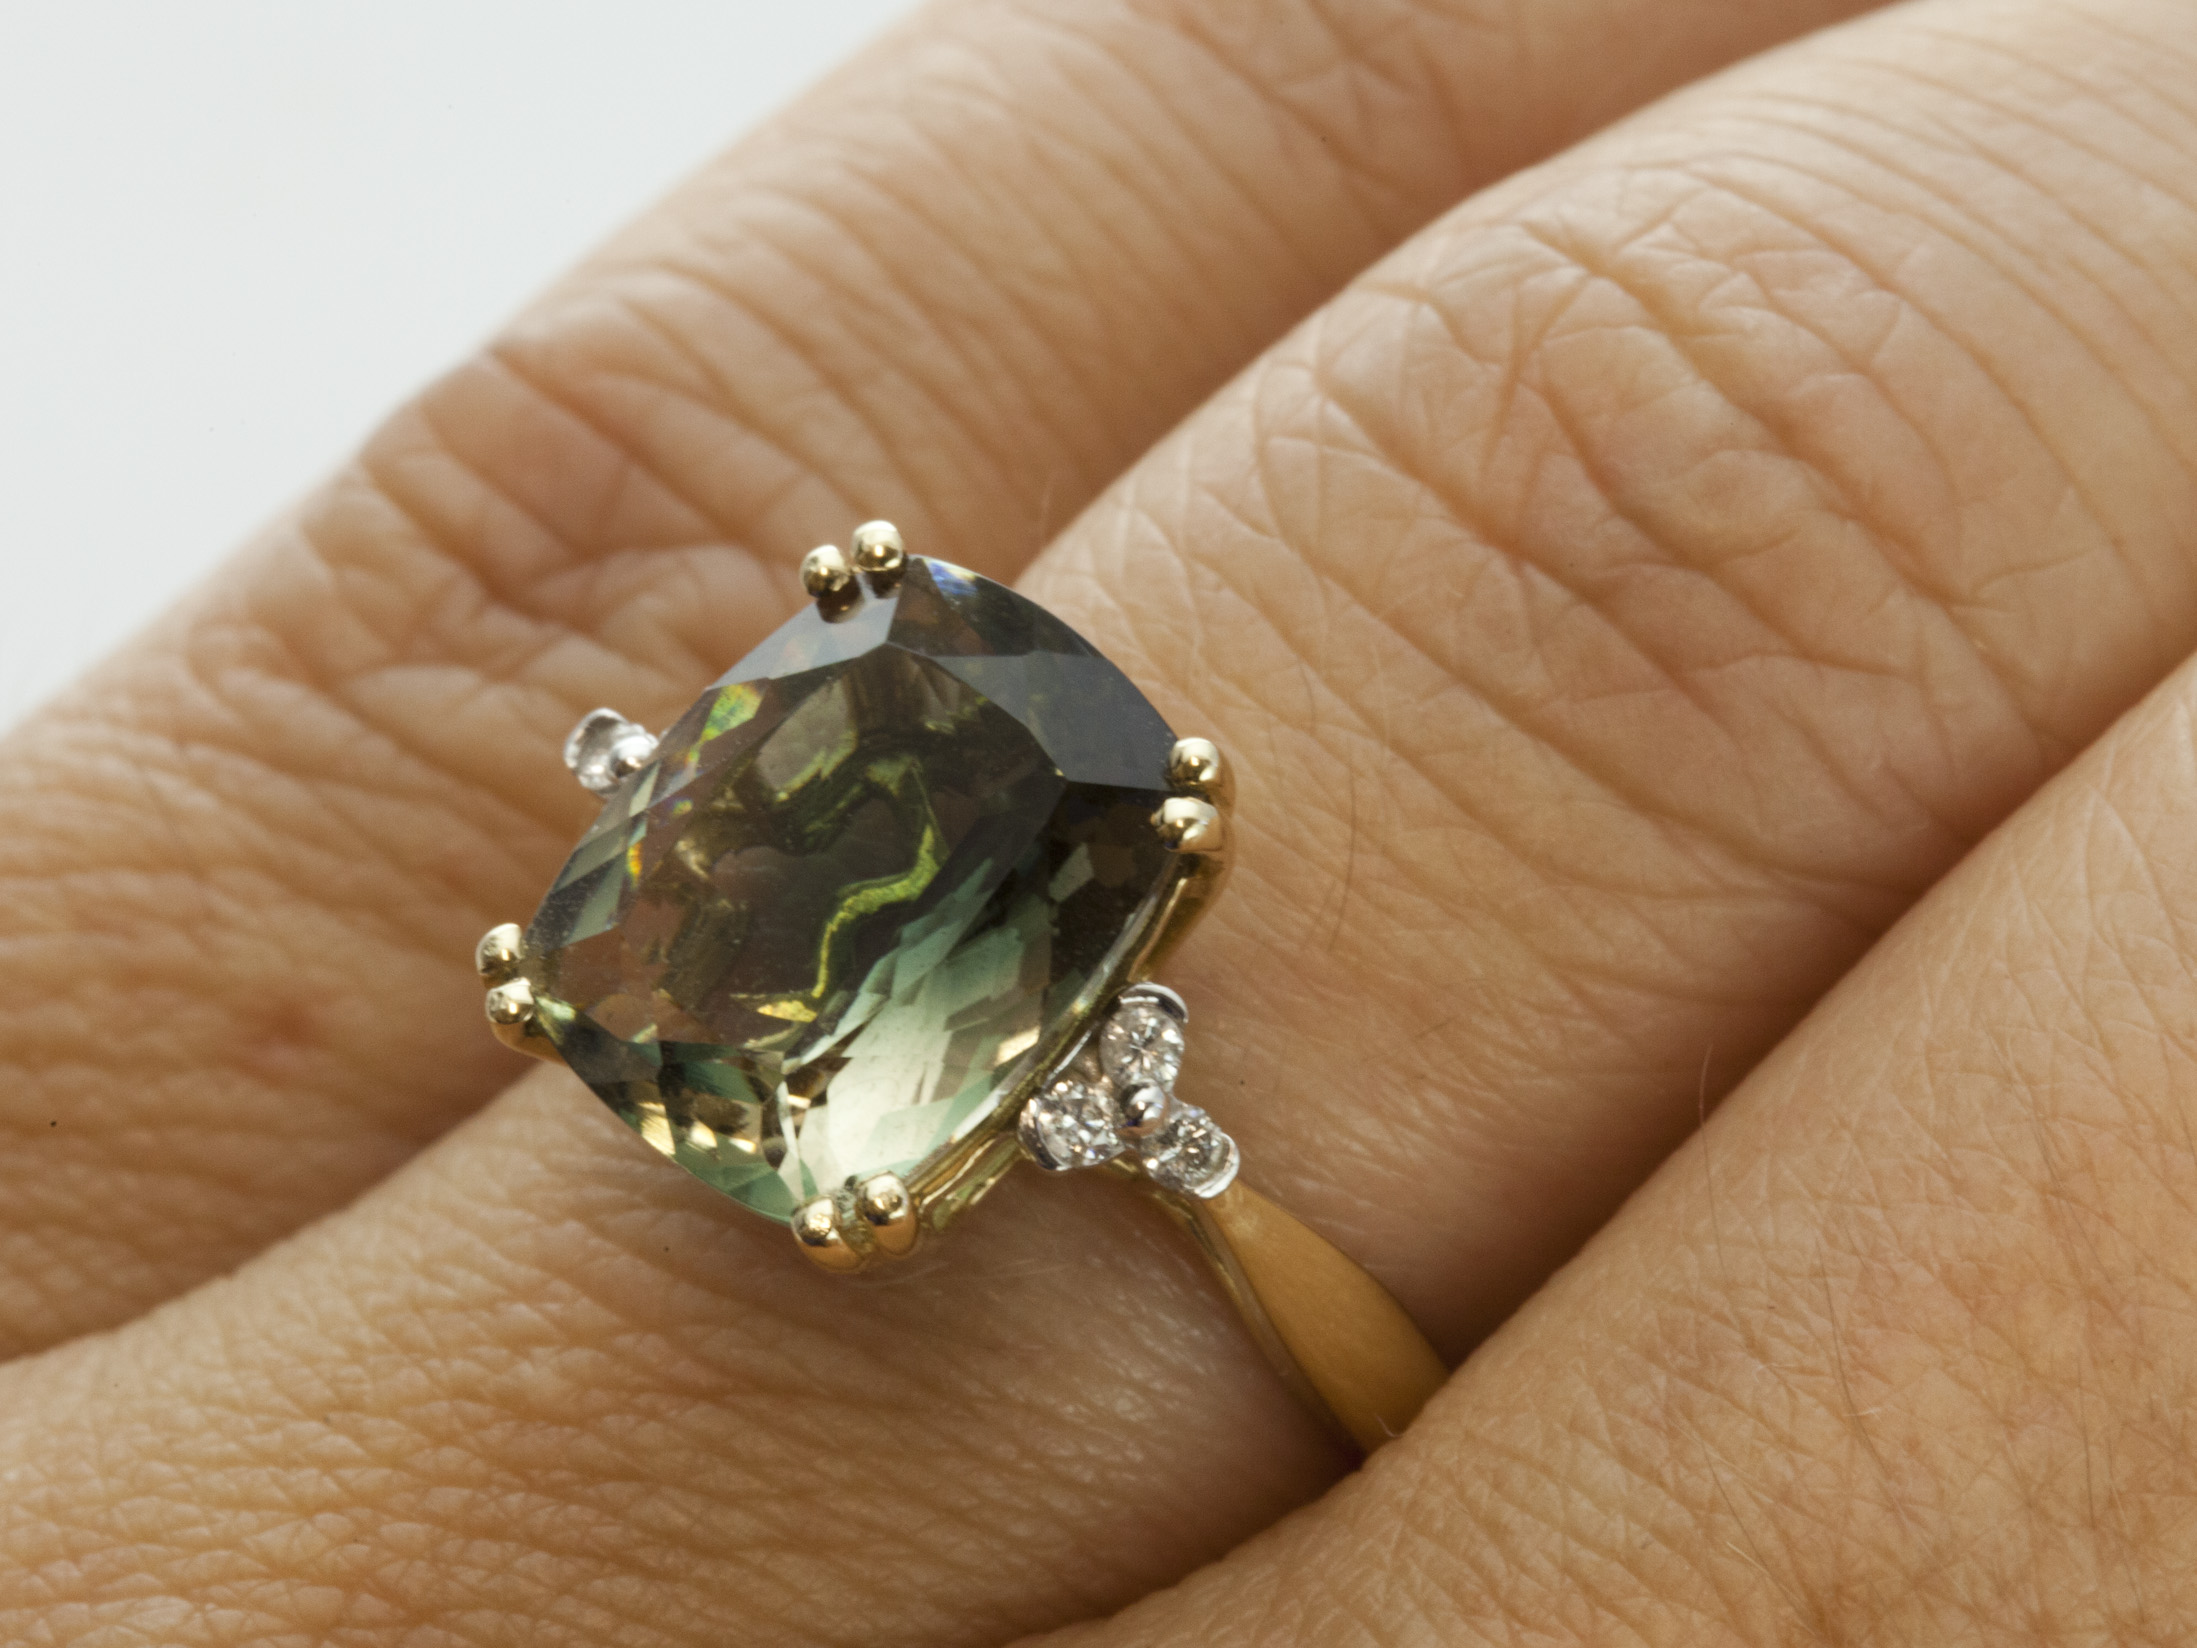 4.2ct Green Sunstone, Gold Ring with Diamonds